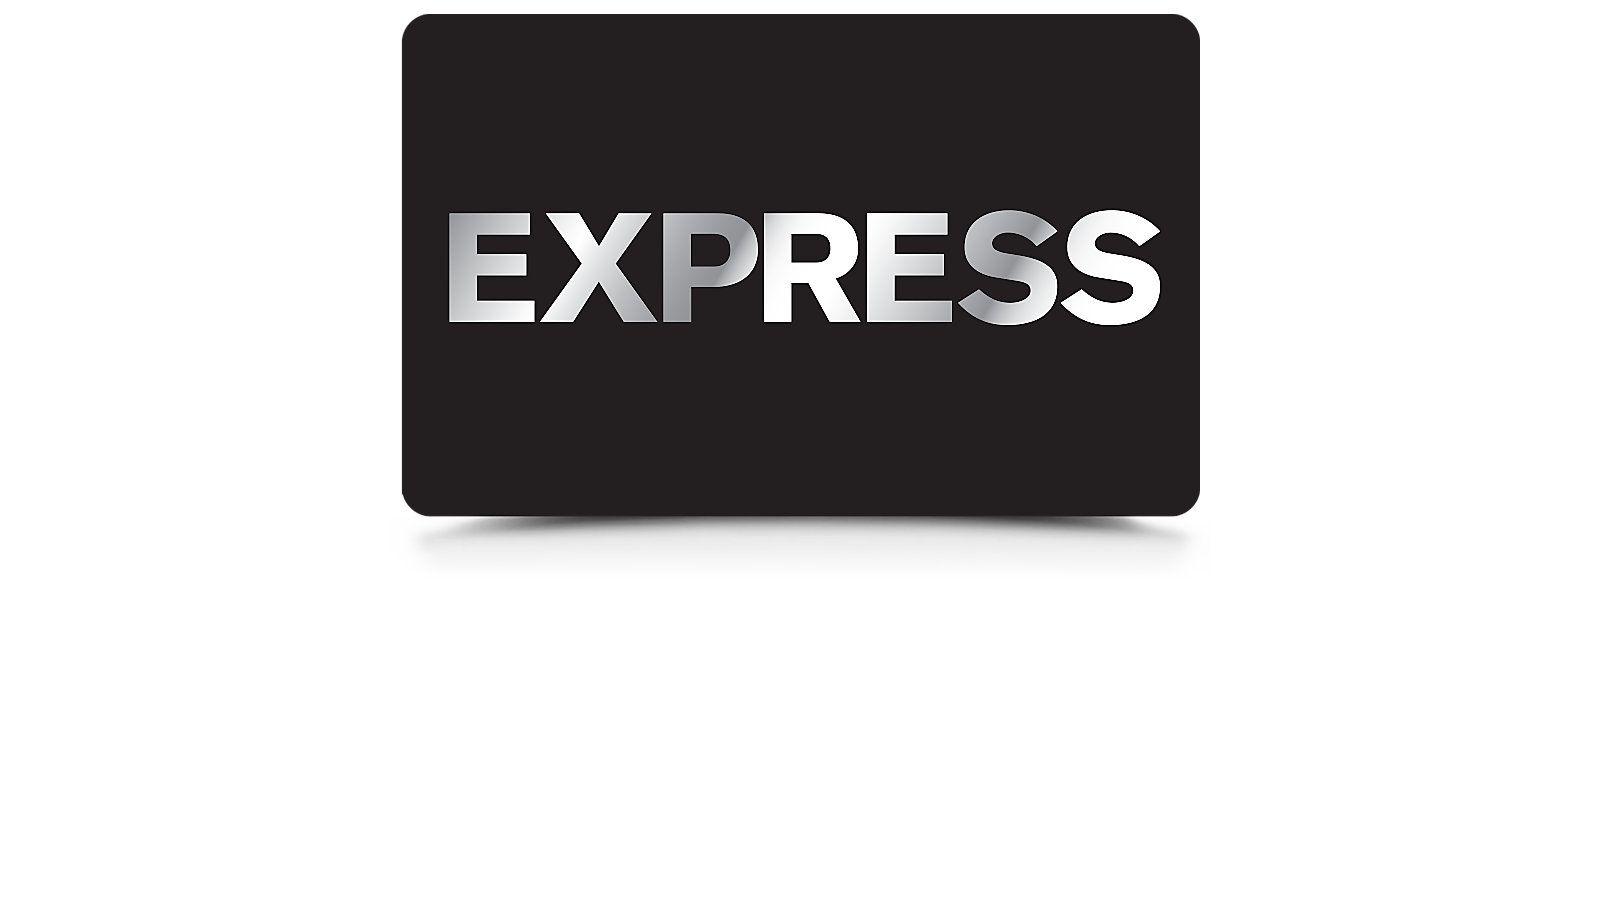 Express Clothing Store Logo - Images for express clothing store logo 7code150.tk